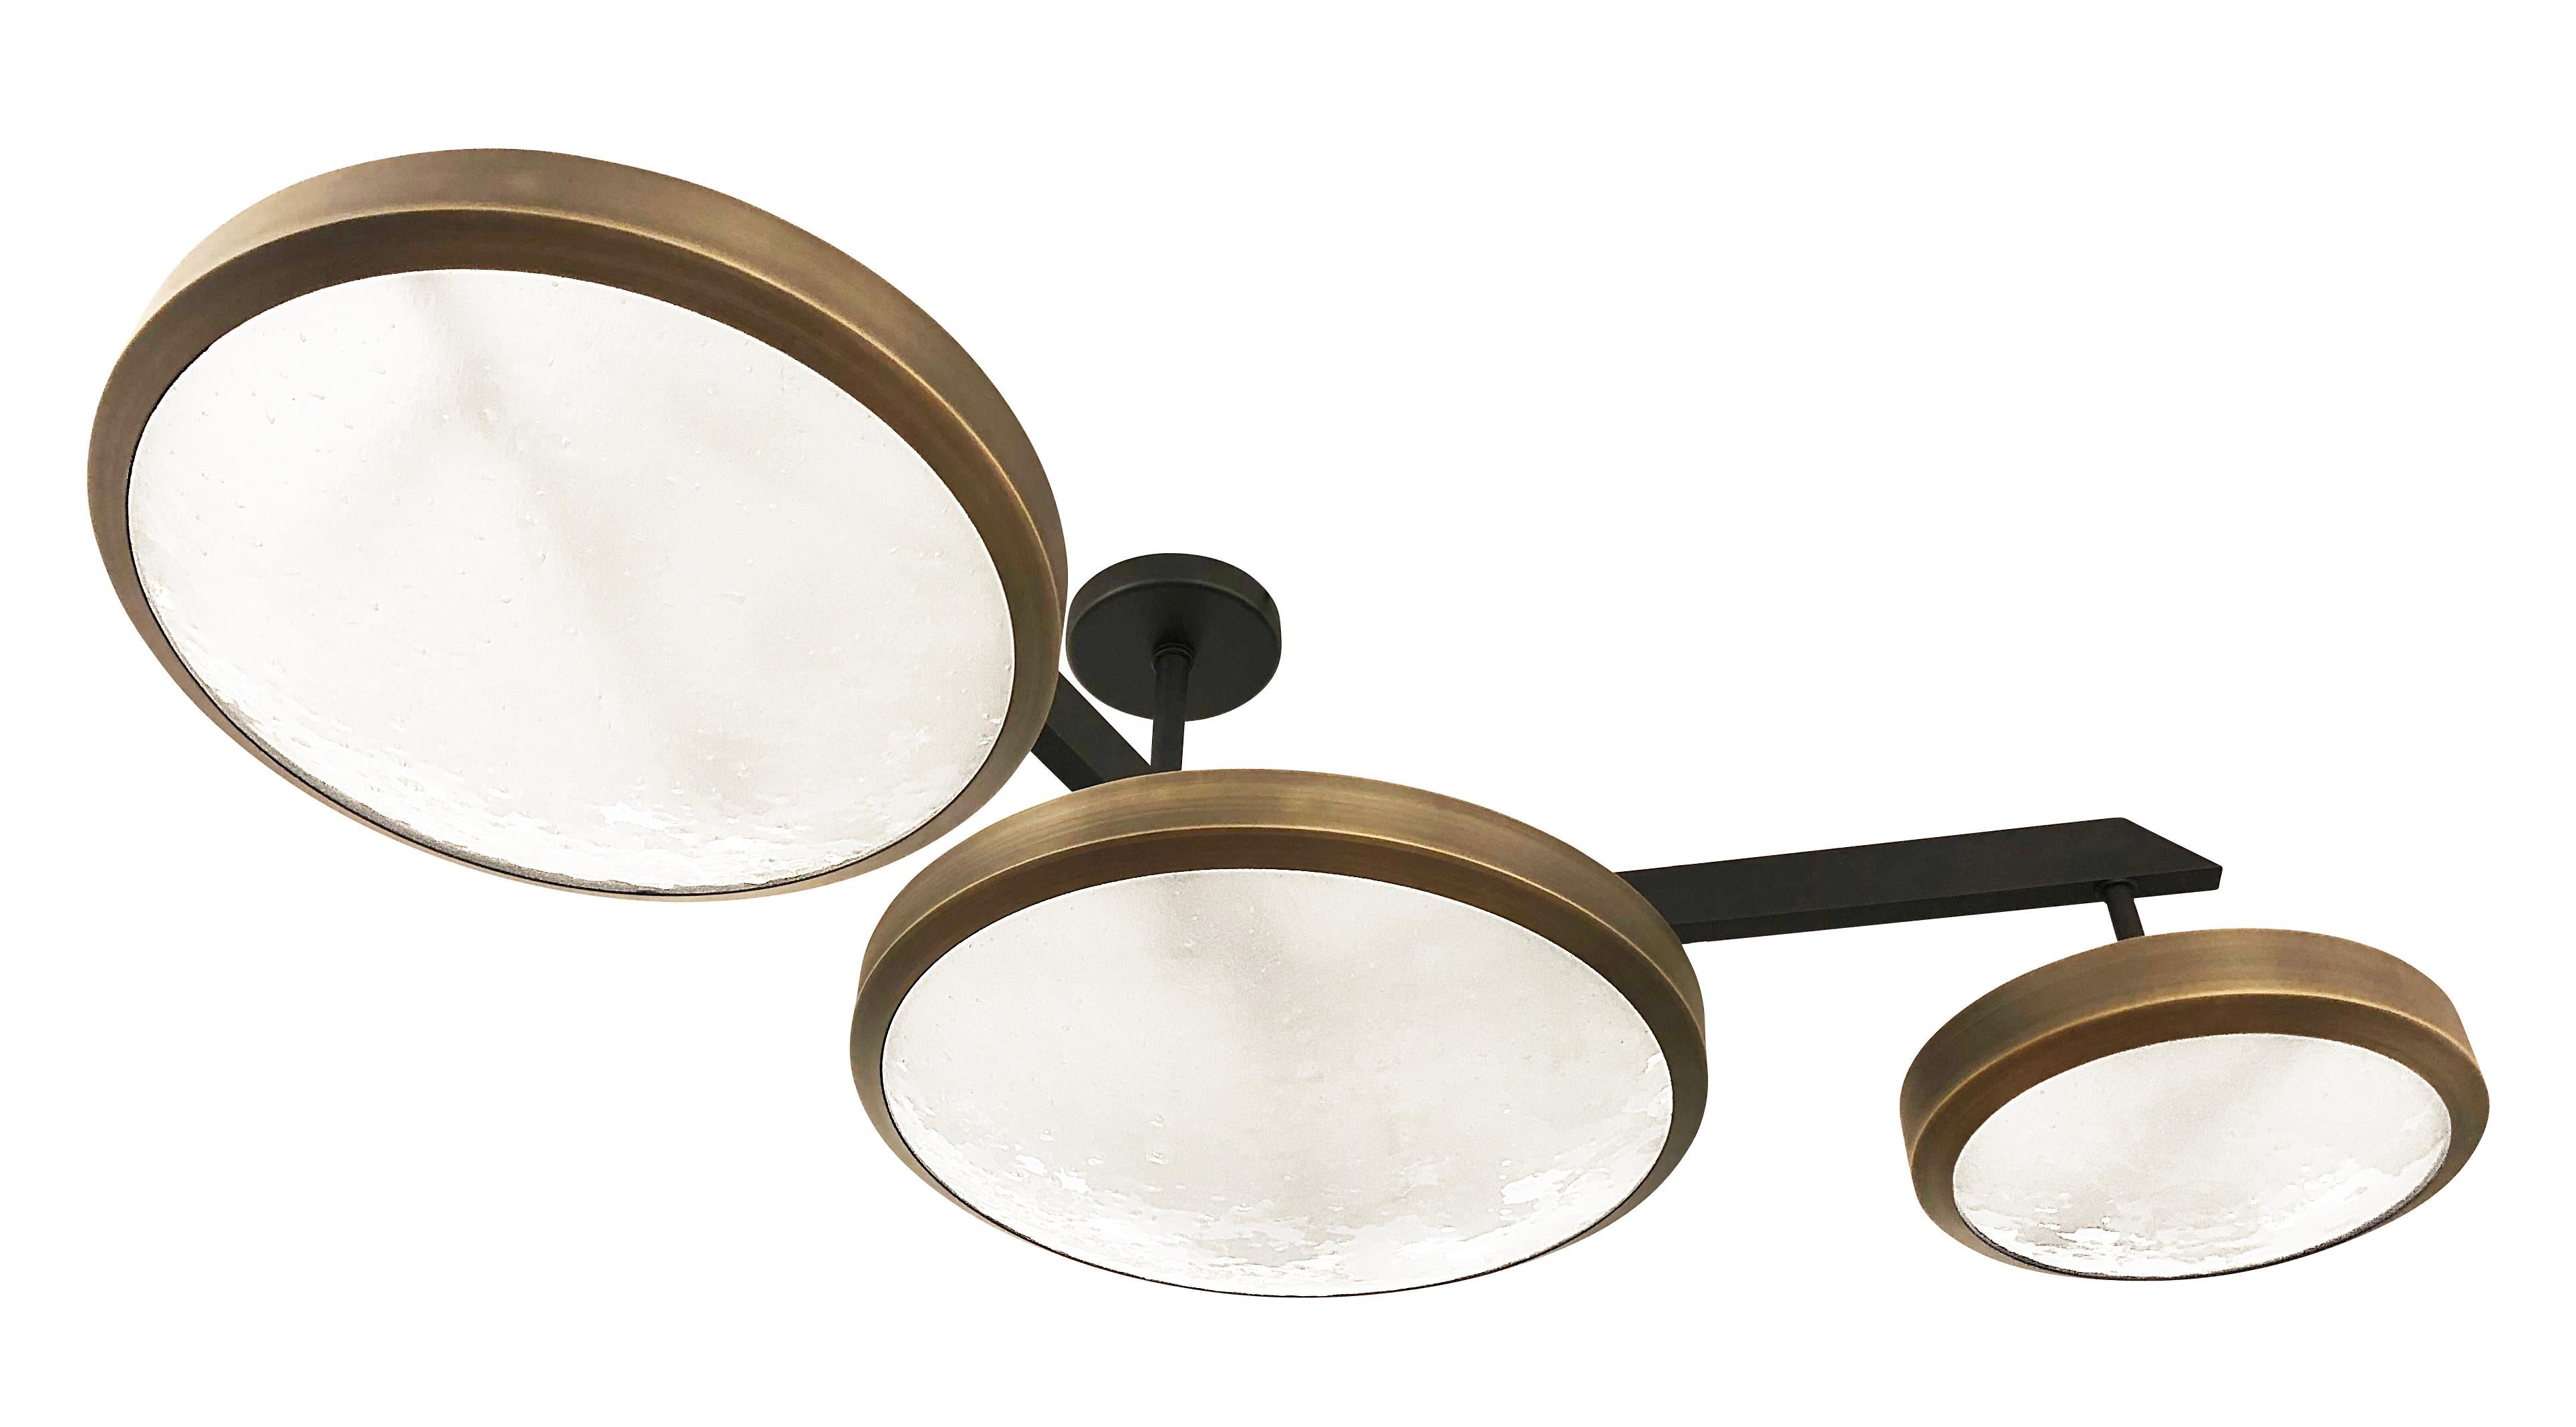 Modern Zeta Ceiling Light by Gaspare Asaro- Two Tone Finish For Sale